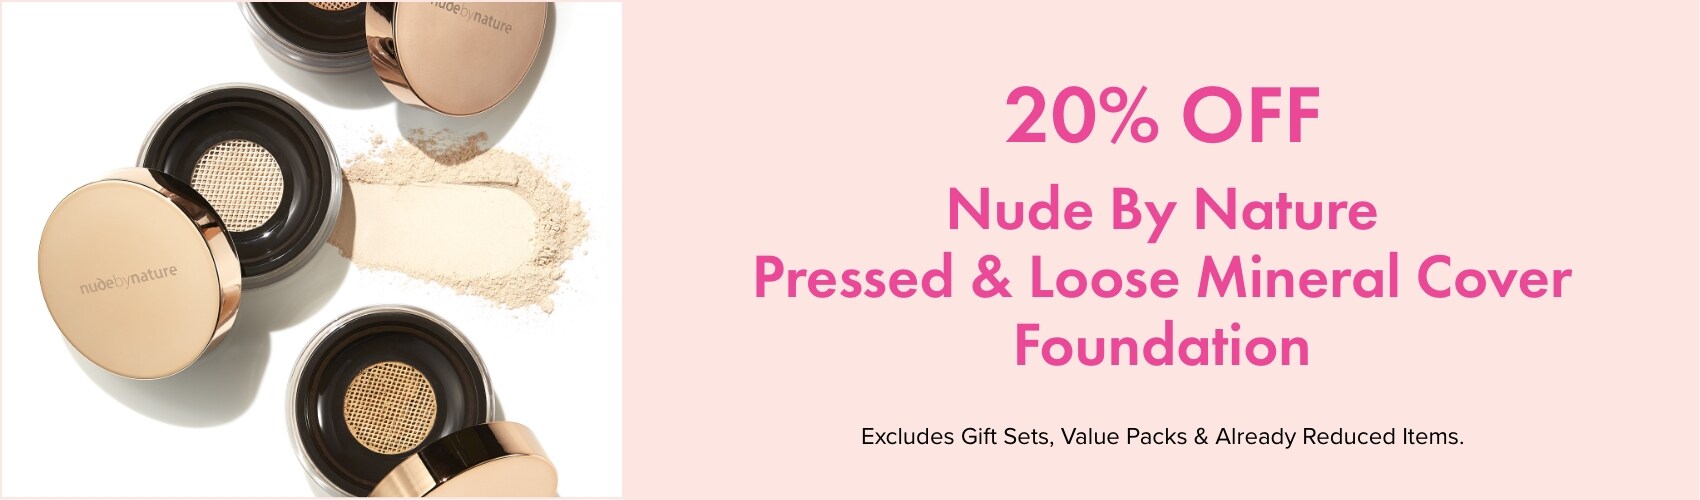 BUY 1 GET 1 HALF PRICE on Nude by Nature 